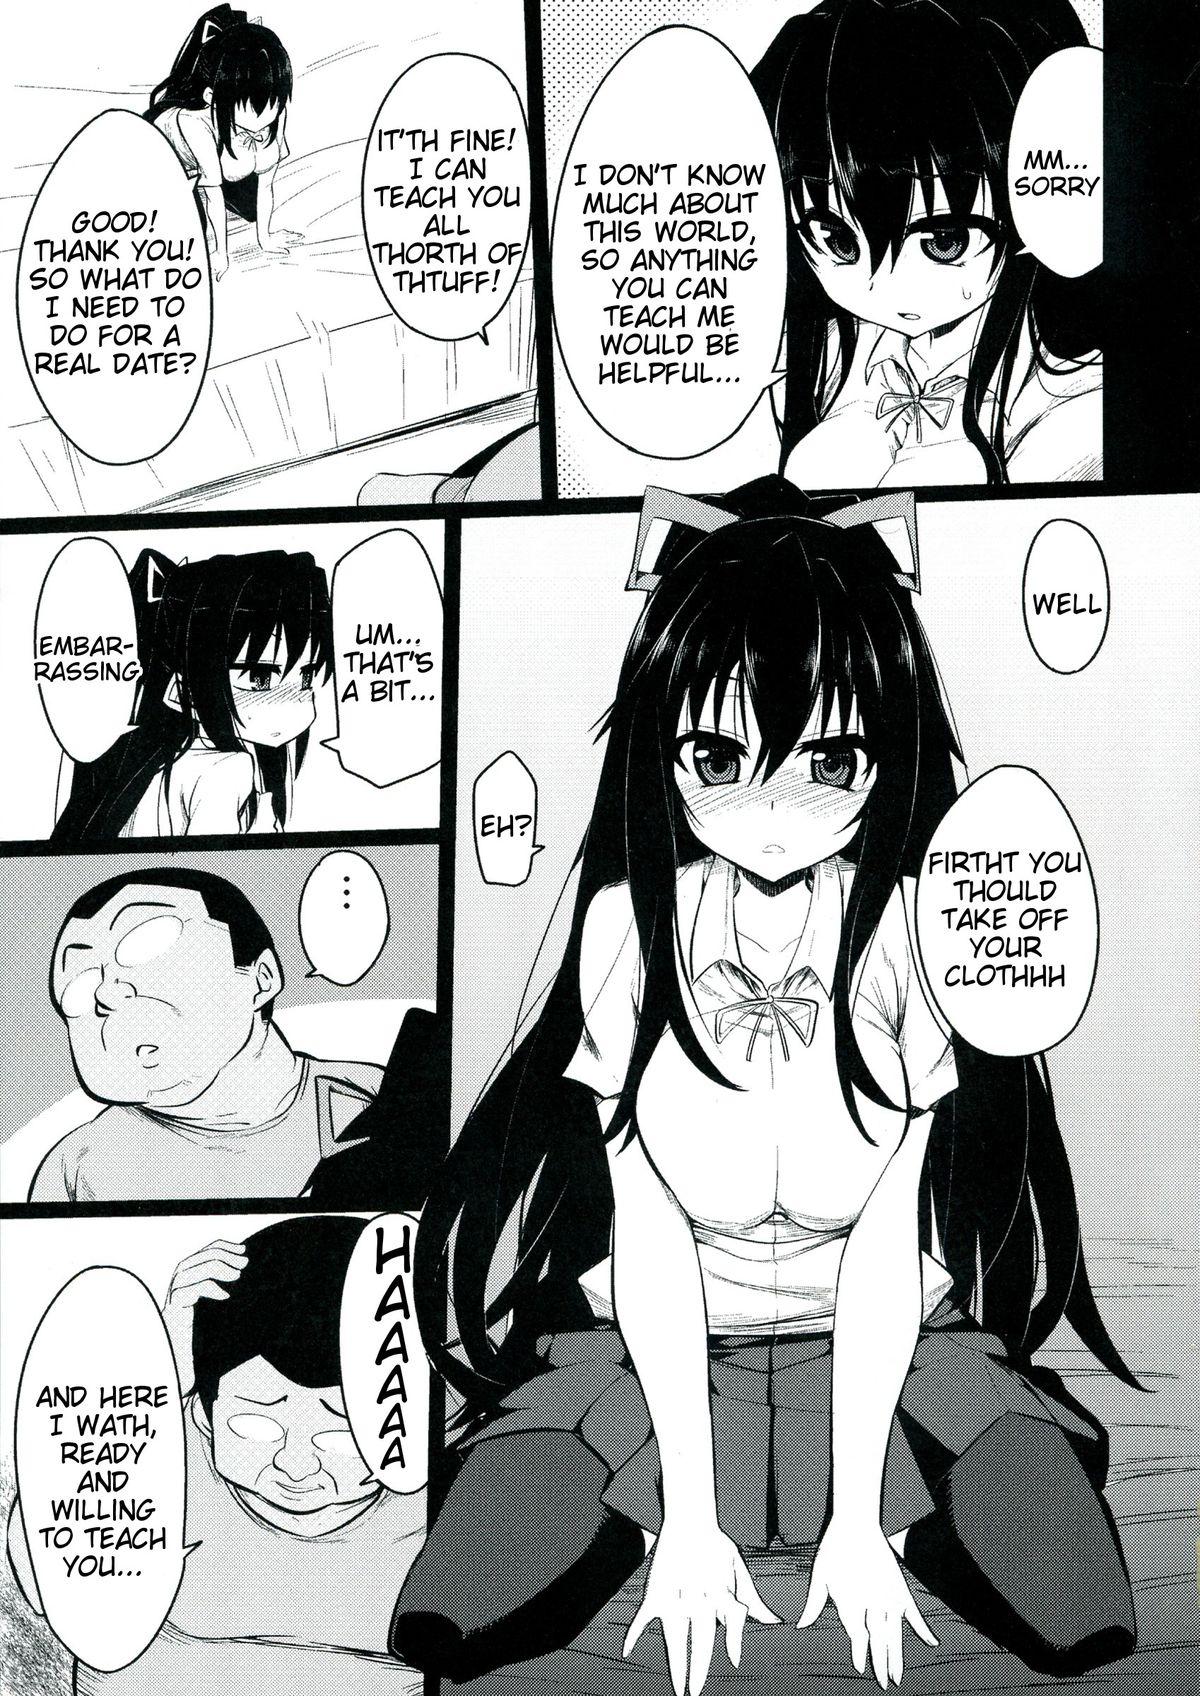 Mofos Date A Strange - Date a live Amature - Page 5